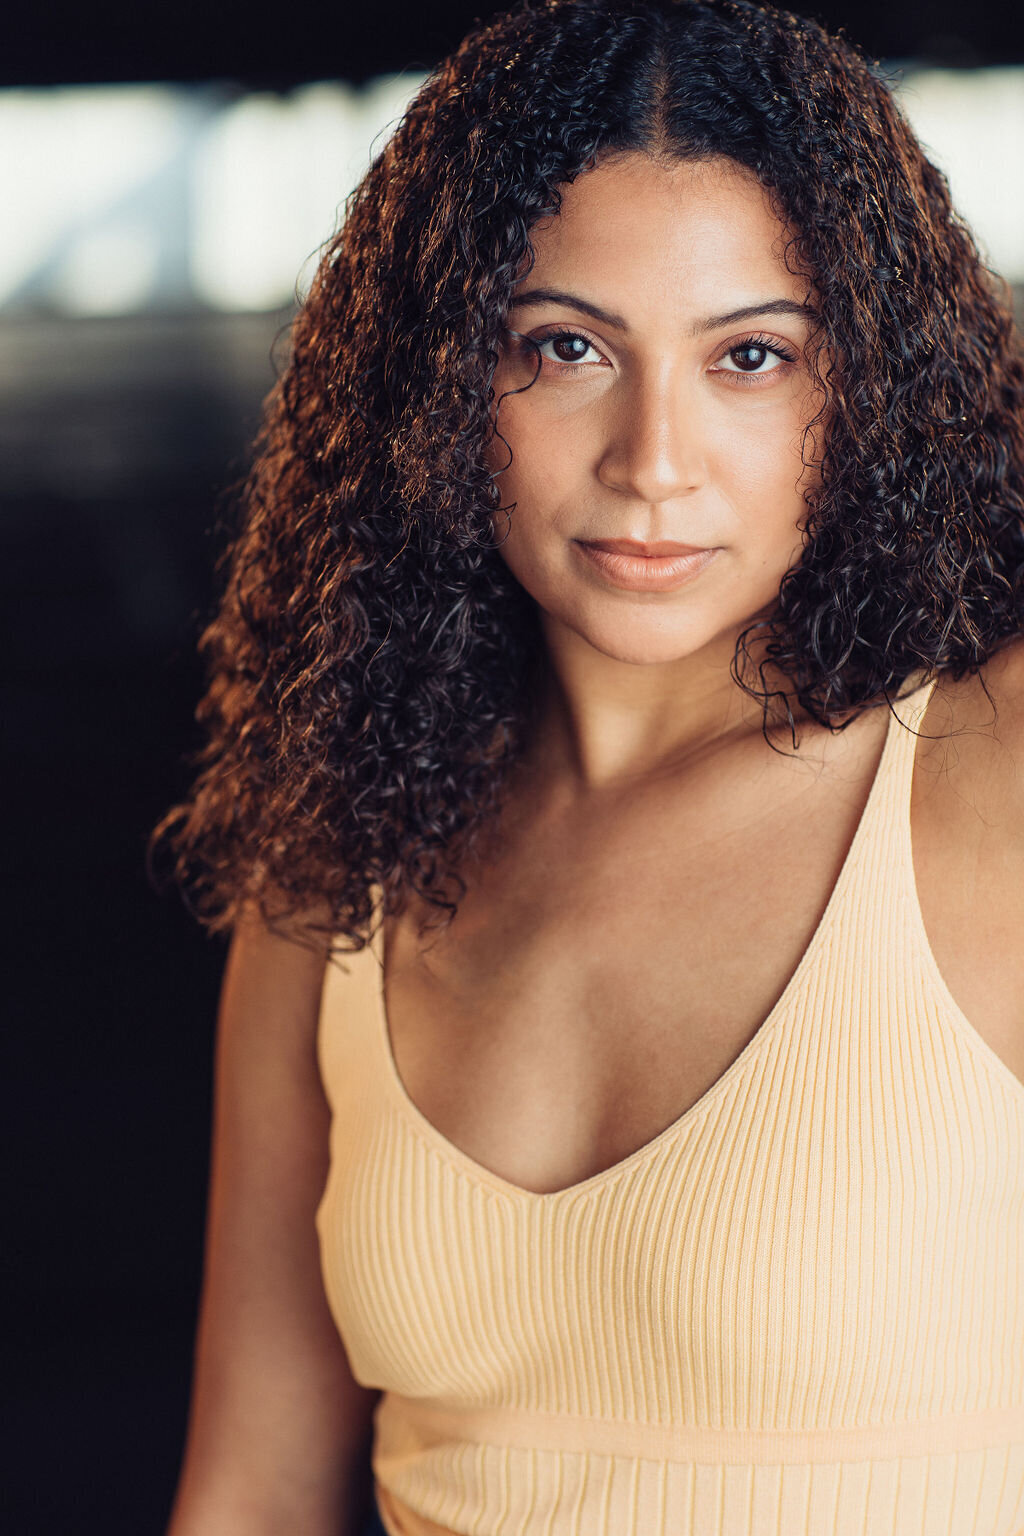 Headshot Photograph Of Young Woman In Light Yellow Sleeveless Los Angeles